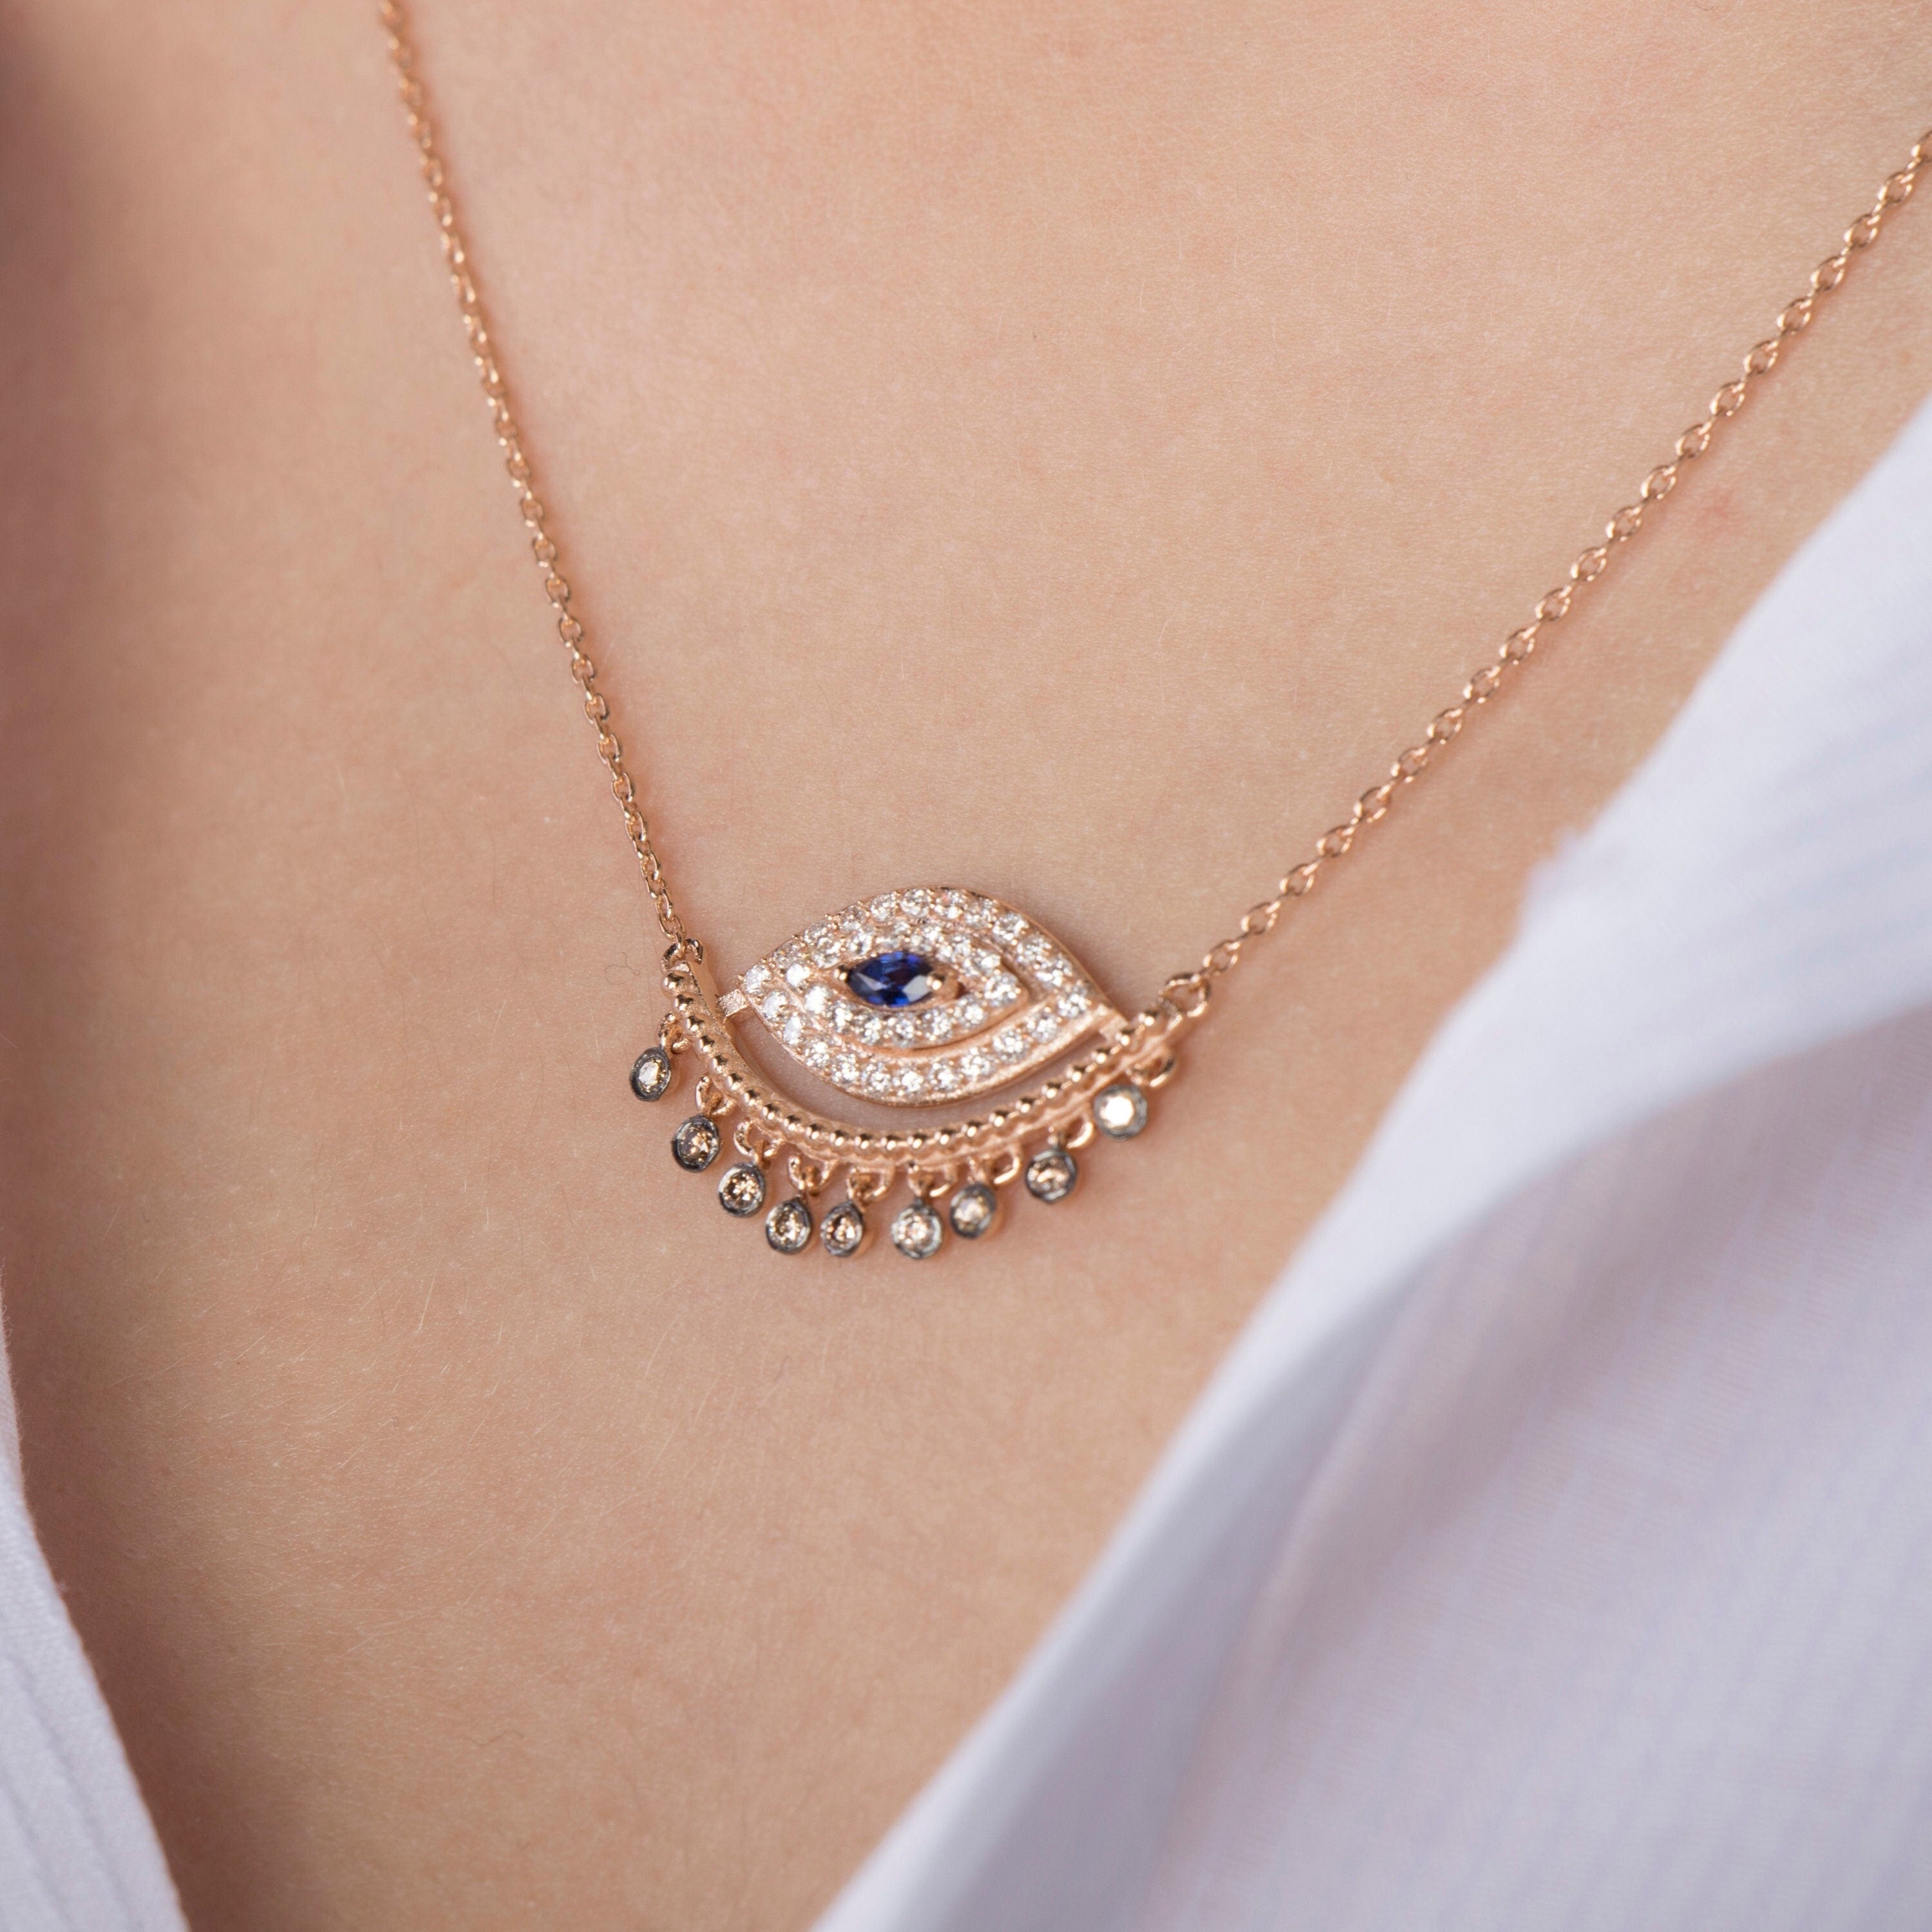 Greek Evil Eye Necklace Available in 14K and 18K Gold